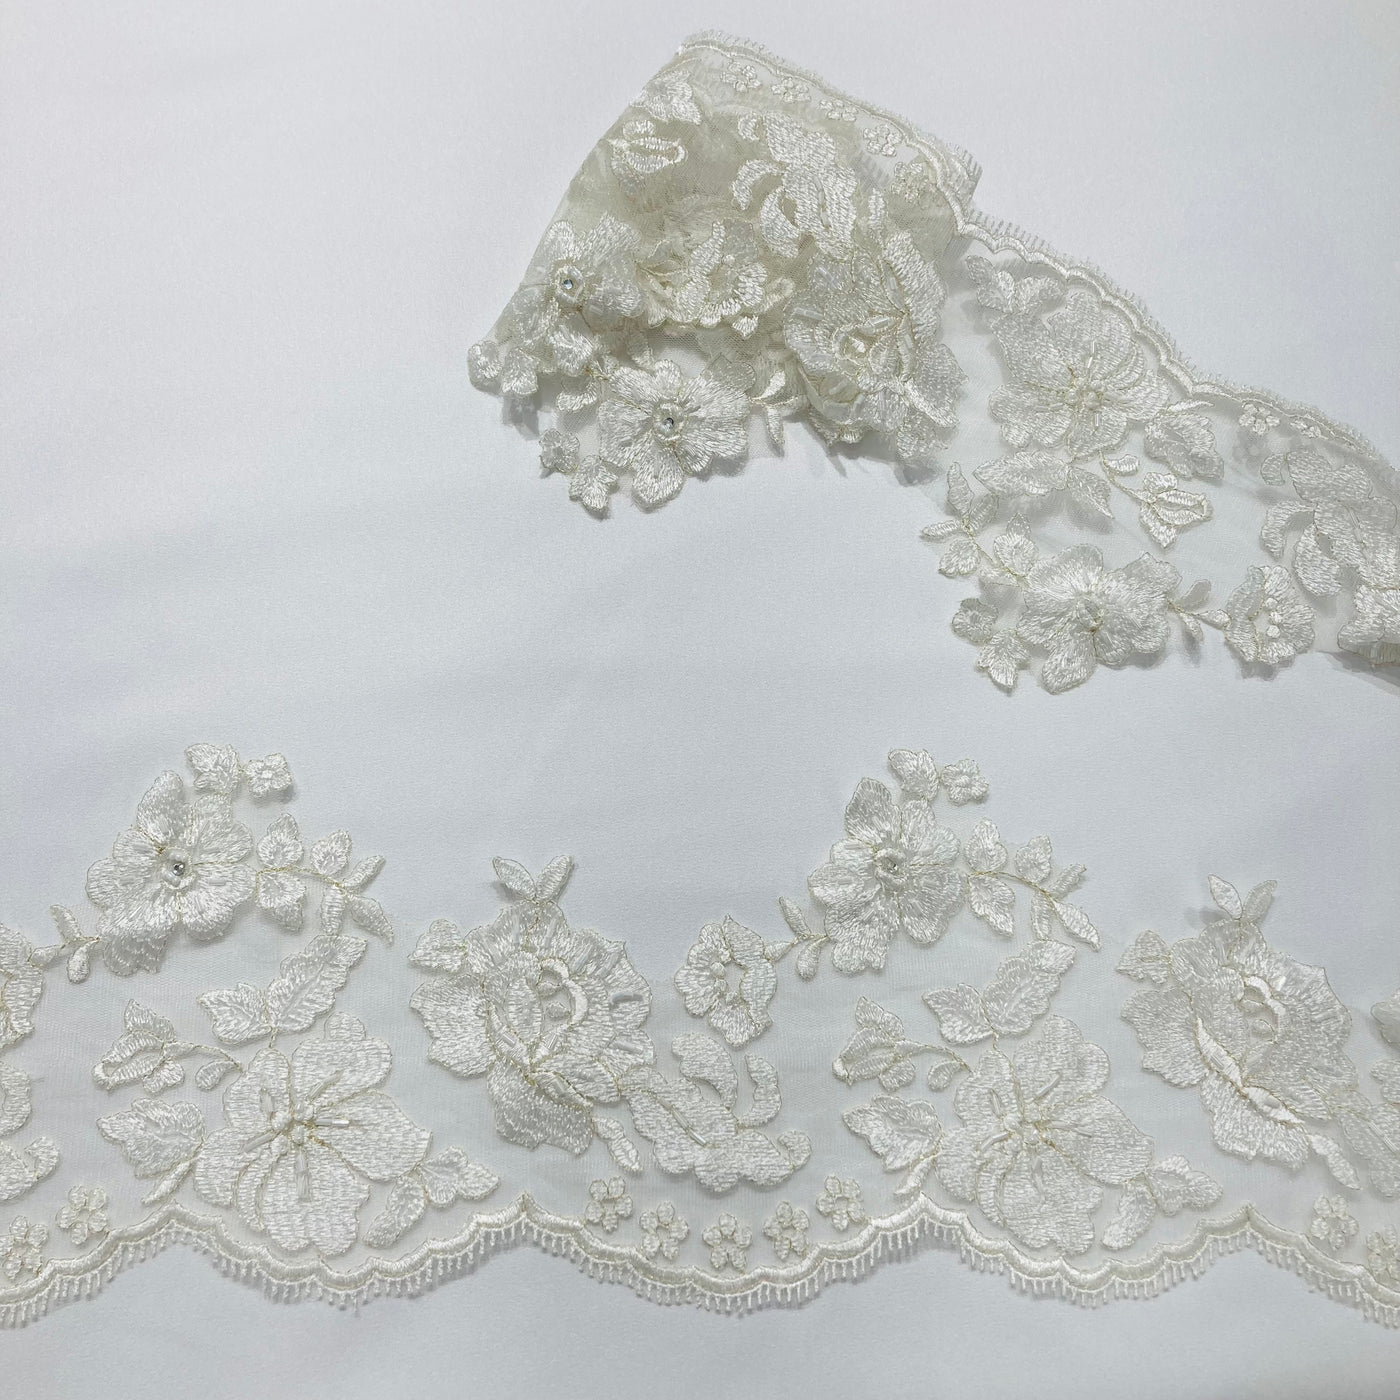 Floral Lace Trimming Embroidered on 100% Polyester Net Mesh. Lace USA